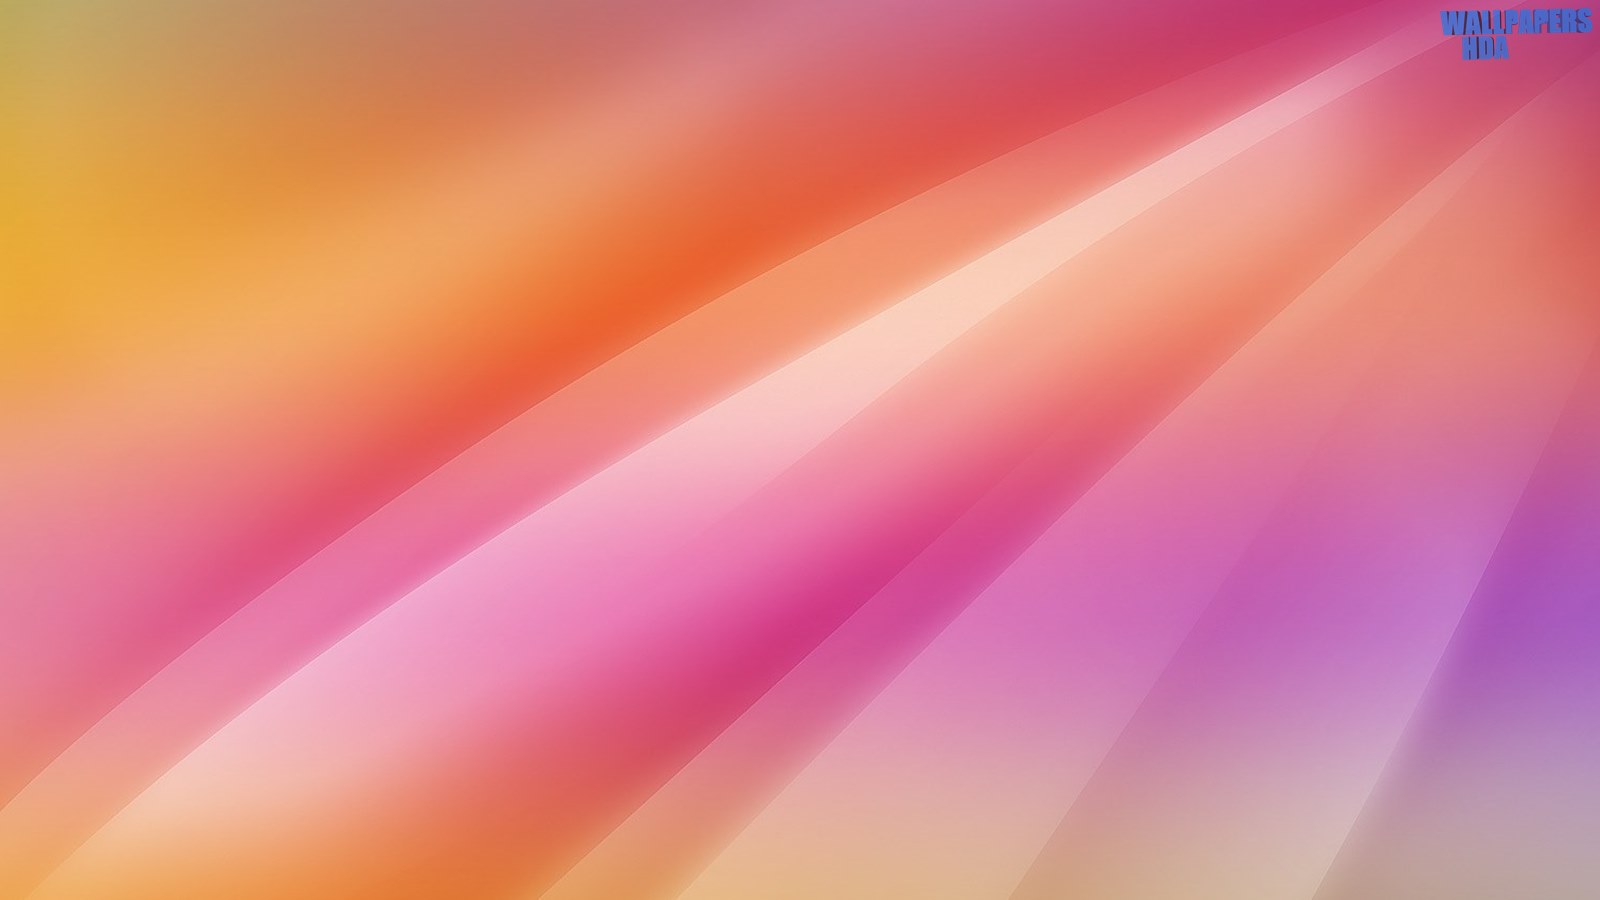 Abstract graphic design warm colors wallpaper 1600x900